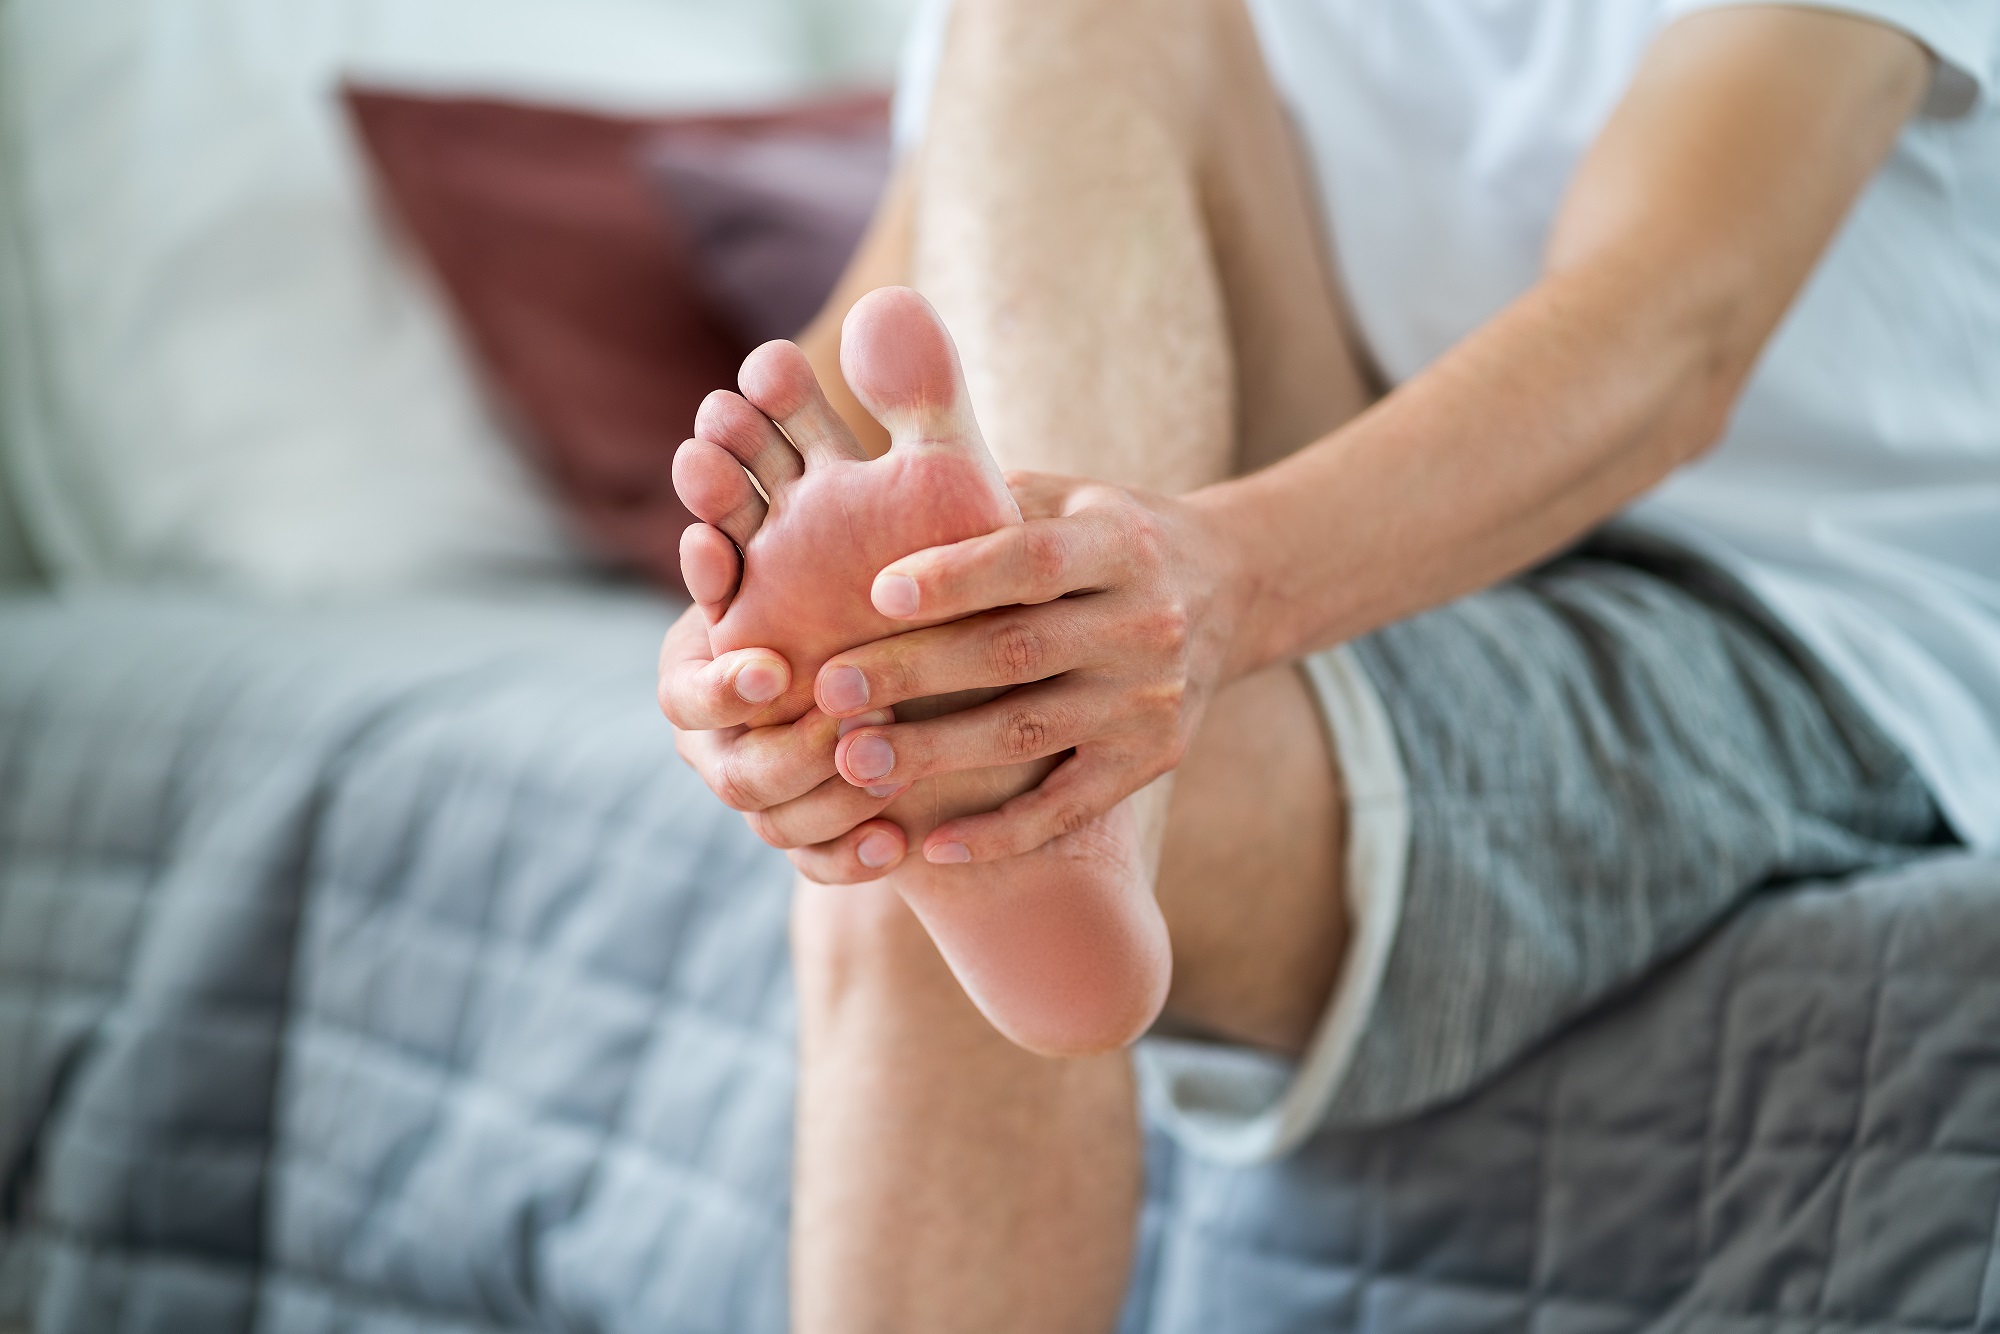 Pain in your instep could be caused by Morton’s neuroma